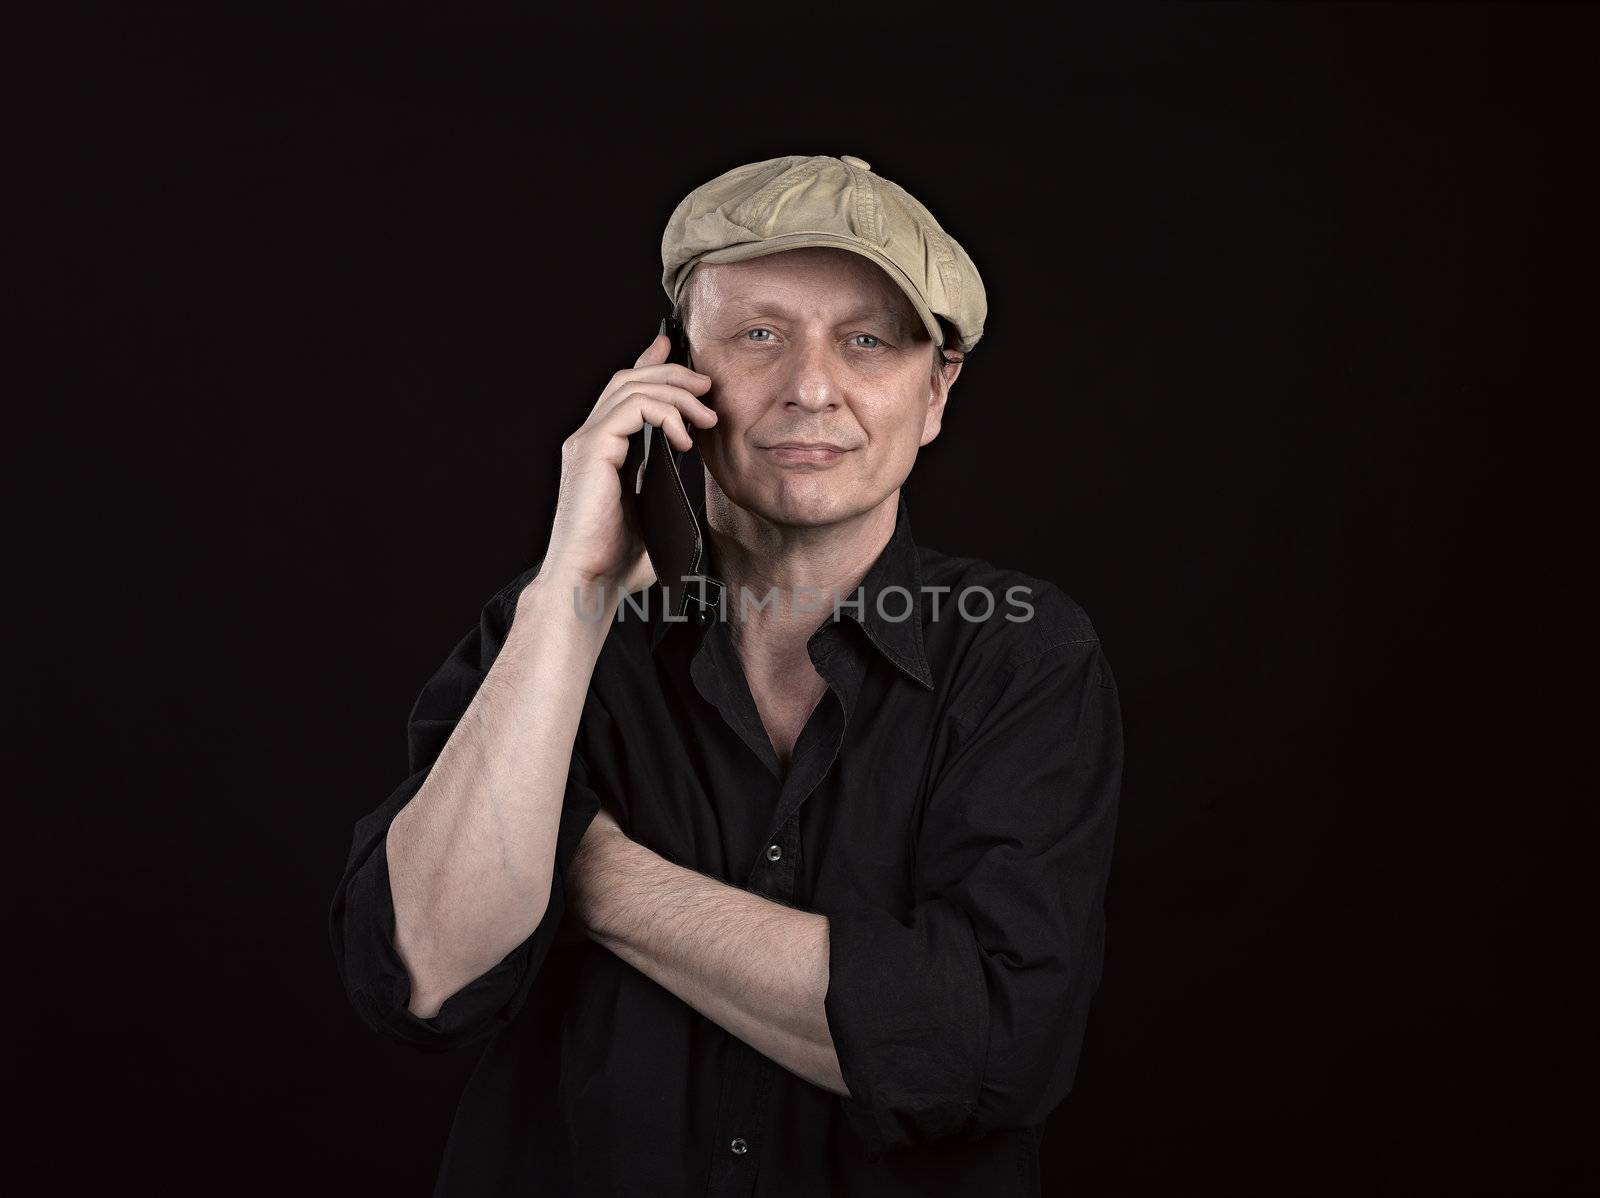 Guy using a mobile phone with copyspace on black